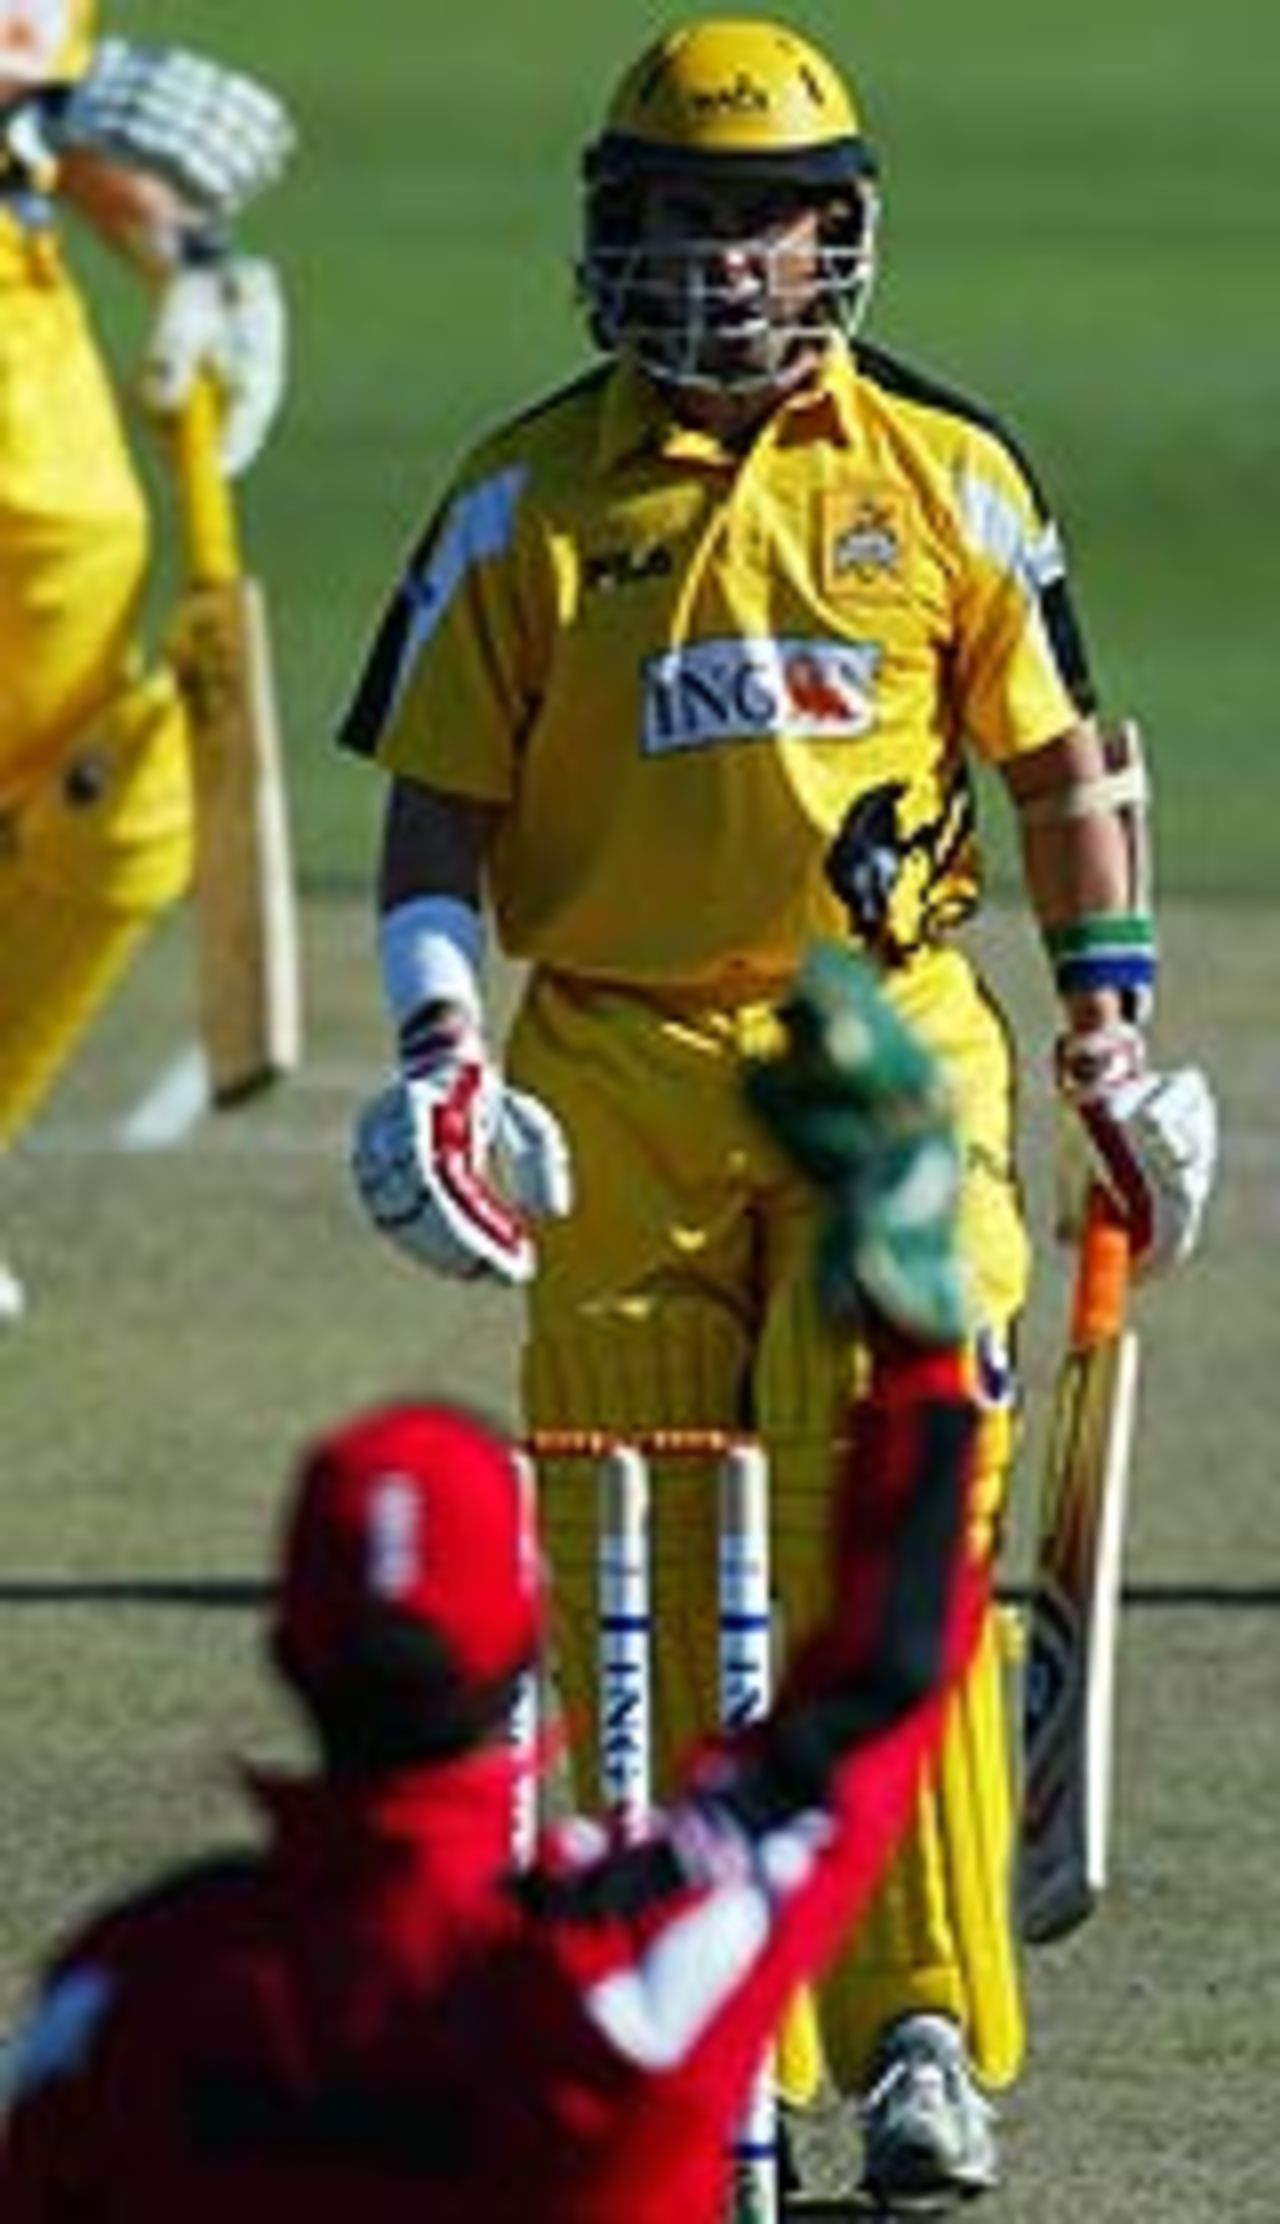 Ryan Campbell is caught behind for 42 during the ING cup game, Western Warriors v South Australian Redbacks, Perth, October 24, 2003